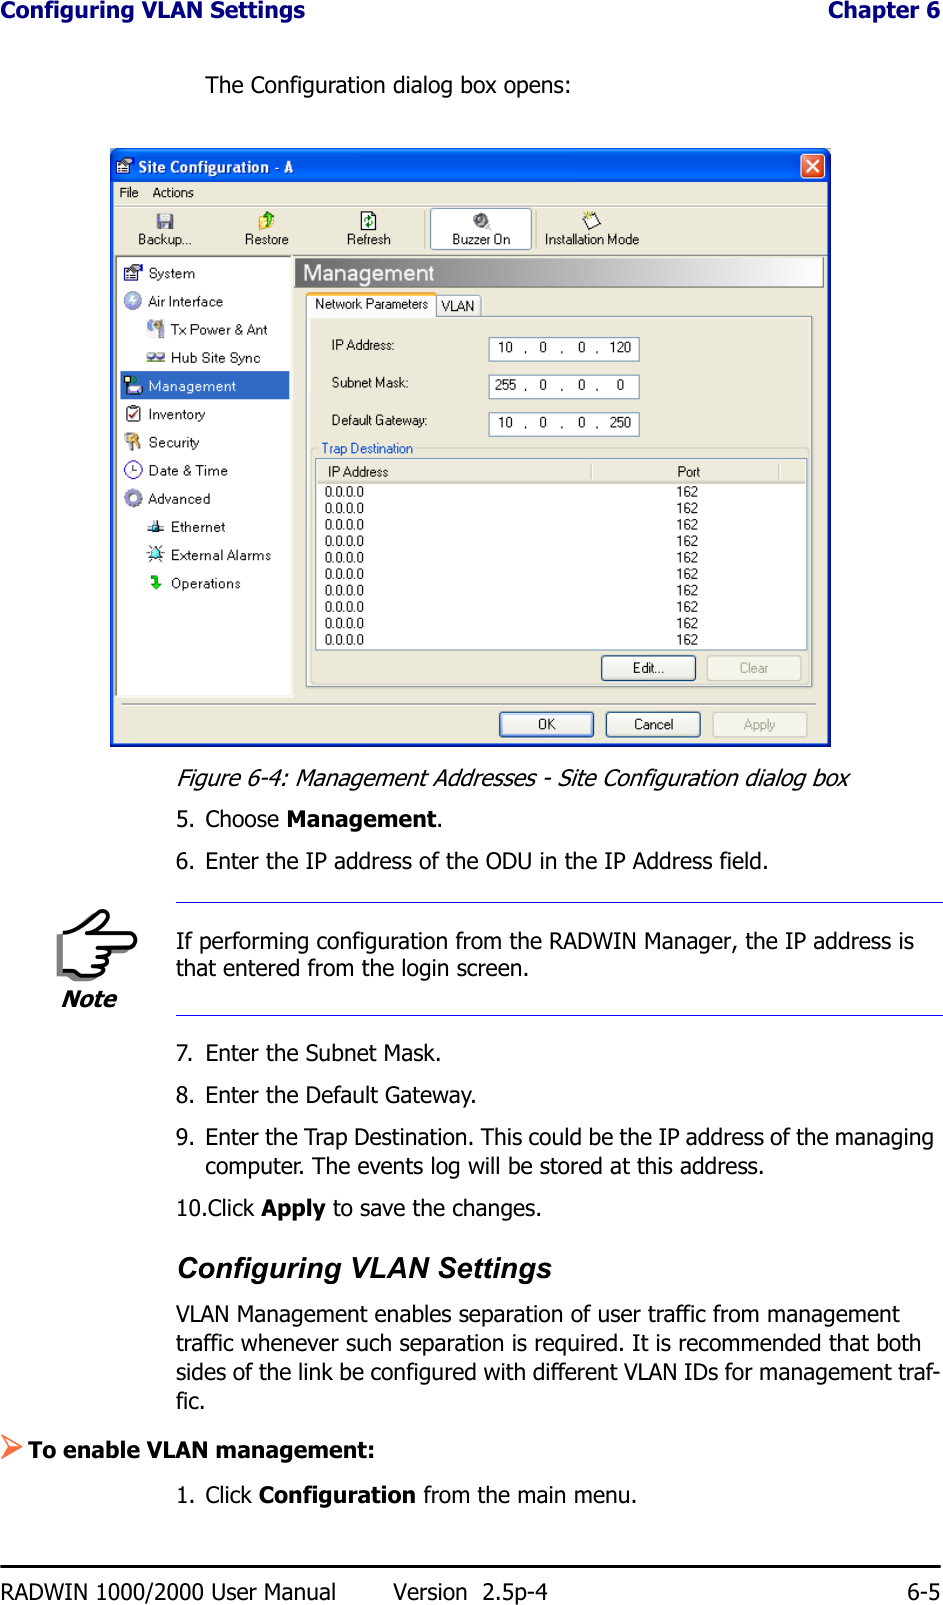 Configuring VLAN Settings  Chapter 6RADWIN 1000/2000 User Manual Version  2.5p-4 6-5The Configuration dialog box opens:Figure 6-4: Management Addresses - Site Configuration dialog box5. Choose Management.6. Enter the IP address of the ODU in the IP Address field.7. Enter the Subnet Mask.8. Enter the Default Gateway.9. Enter the Trap Destination. This could be the IP address of the managing computer. The events log will be stored at this address.10.Click Apply to save the changes.Configuring VLAN SettingsVLAN Management enables separation of user traffic from management traffic whenever such separation is required. It is recommended that both sides of the link be configured with different VLAN IDs for management traf-fic.¾To enable VLAN management:1. Click Configuration from the main menu.NoteIf performing configuration from the RADWIN Manager, the IP address is that entered from the login screen.